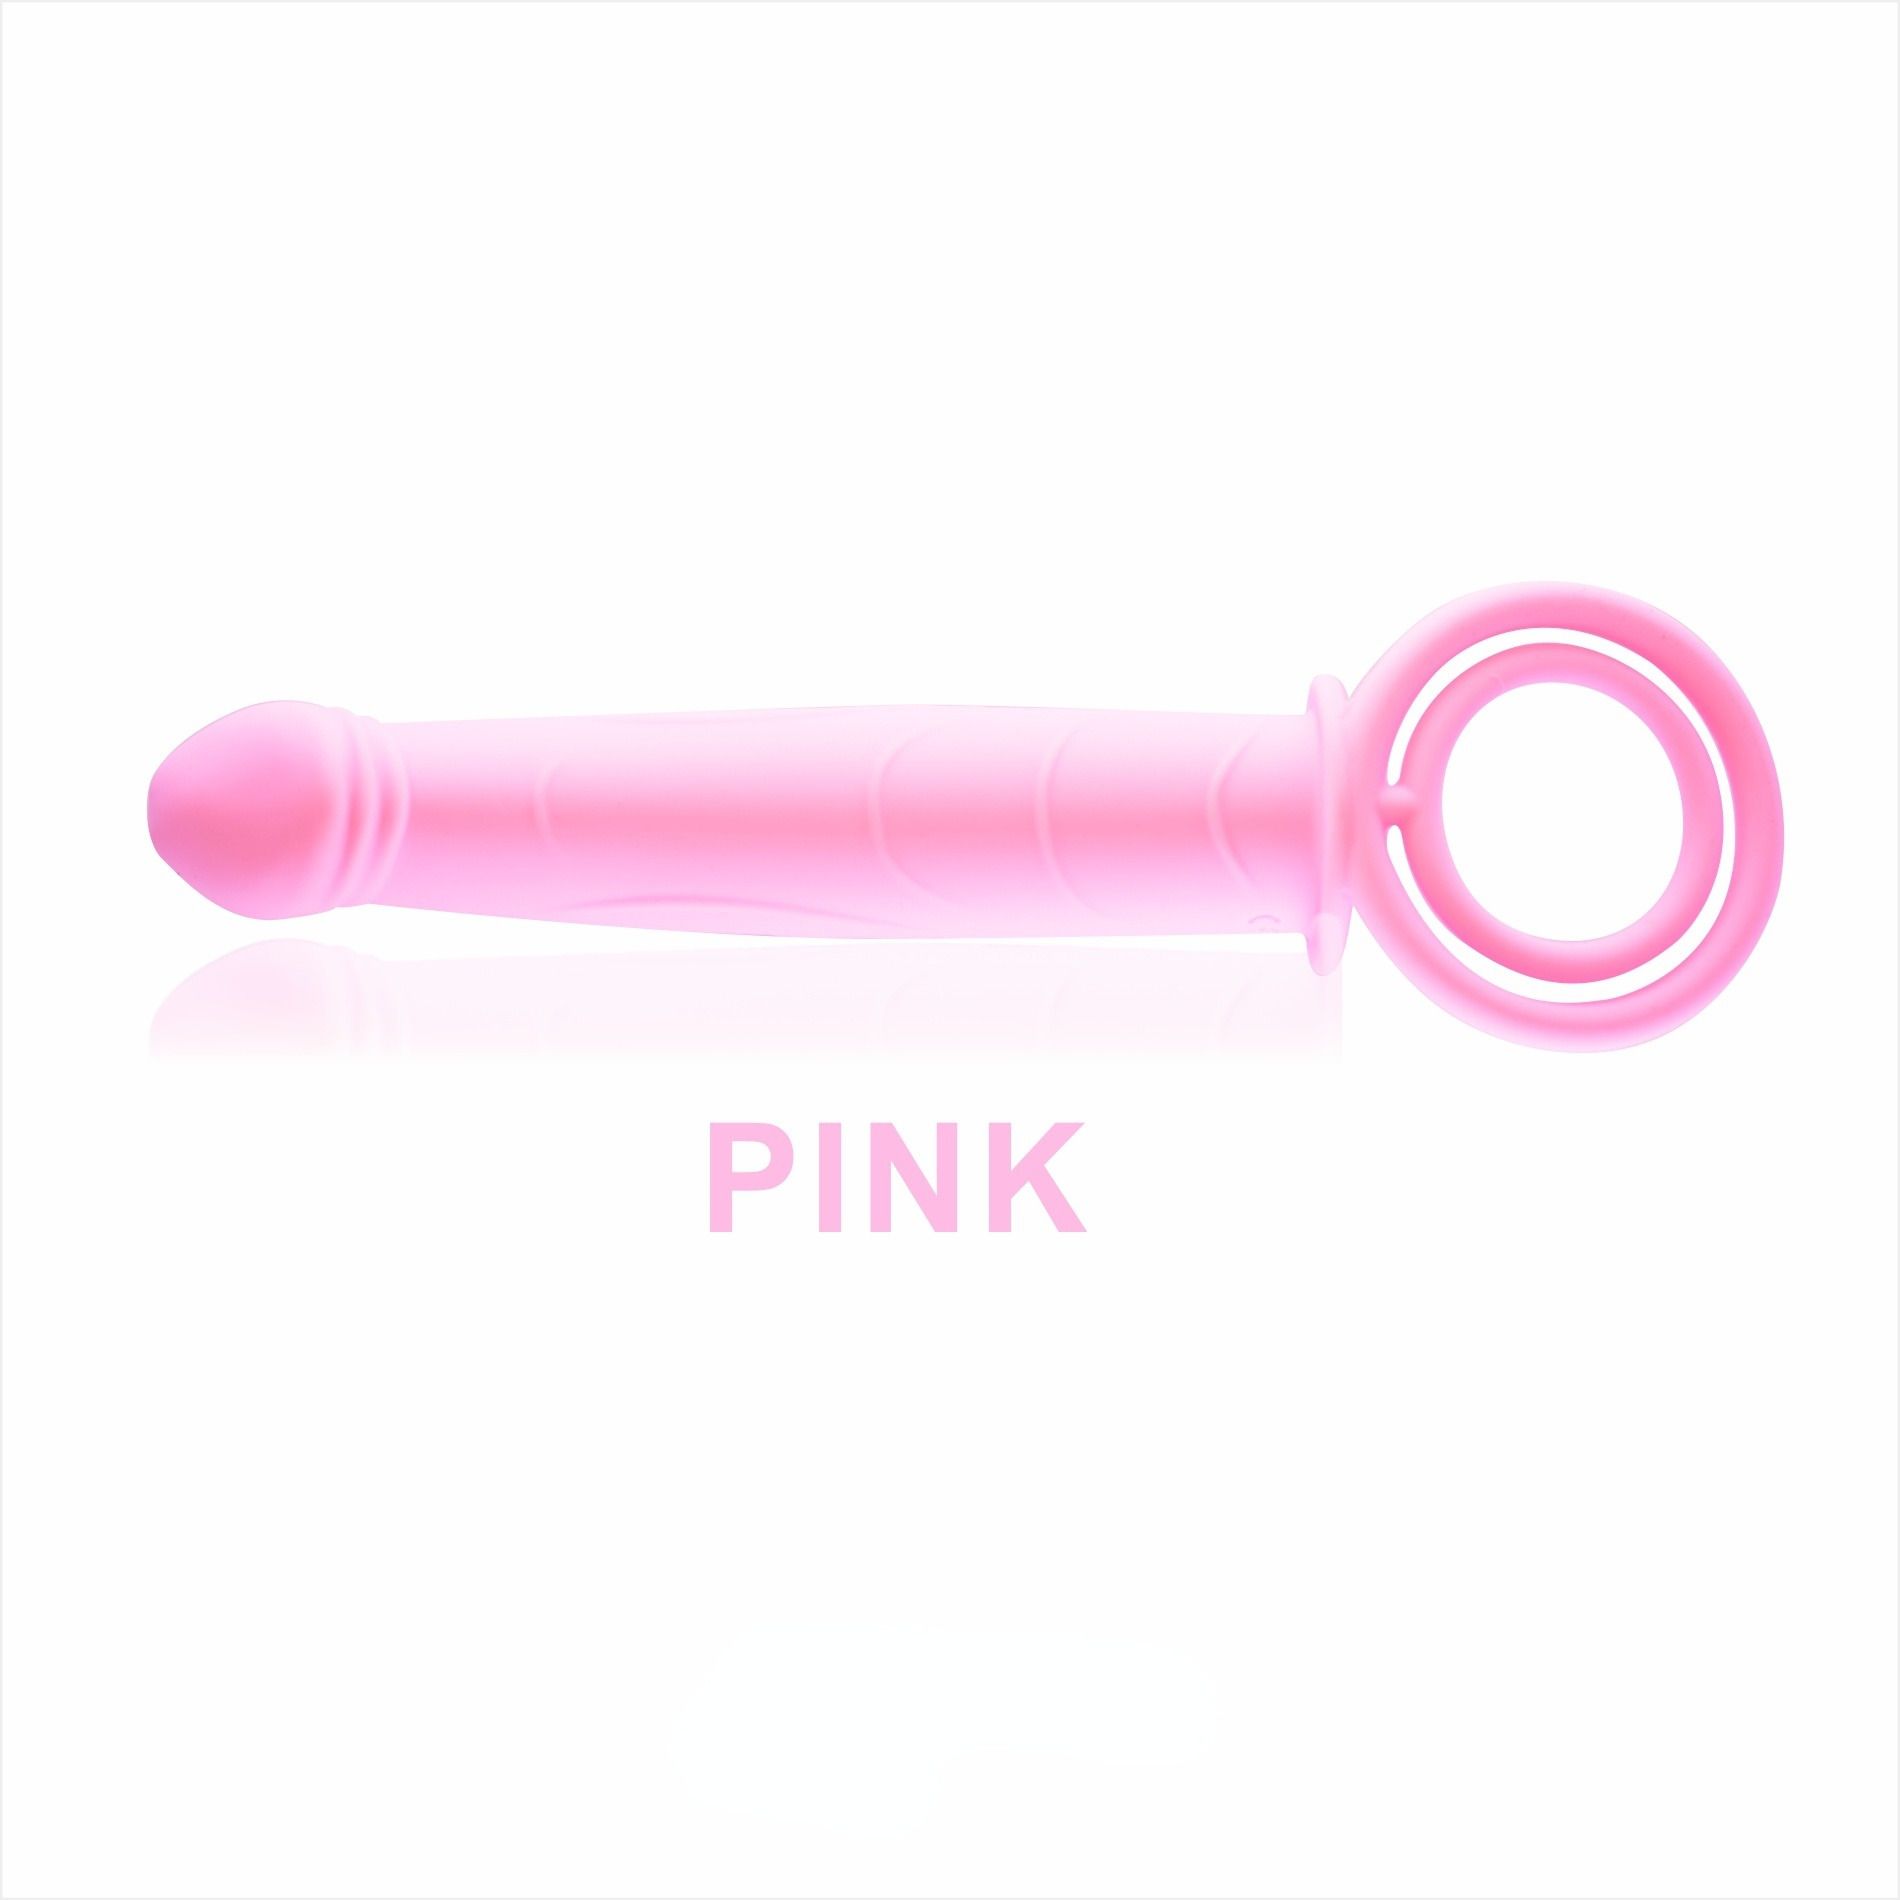 Pink with Vibrator